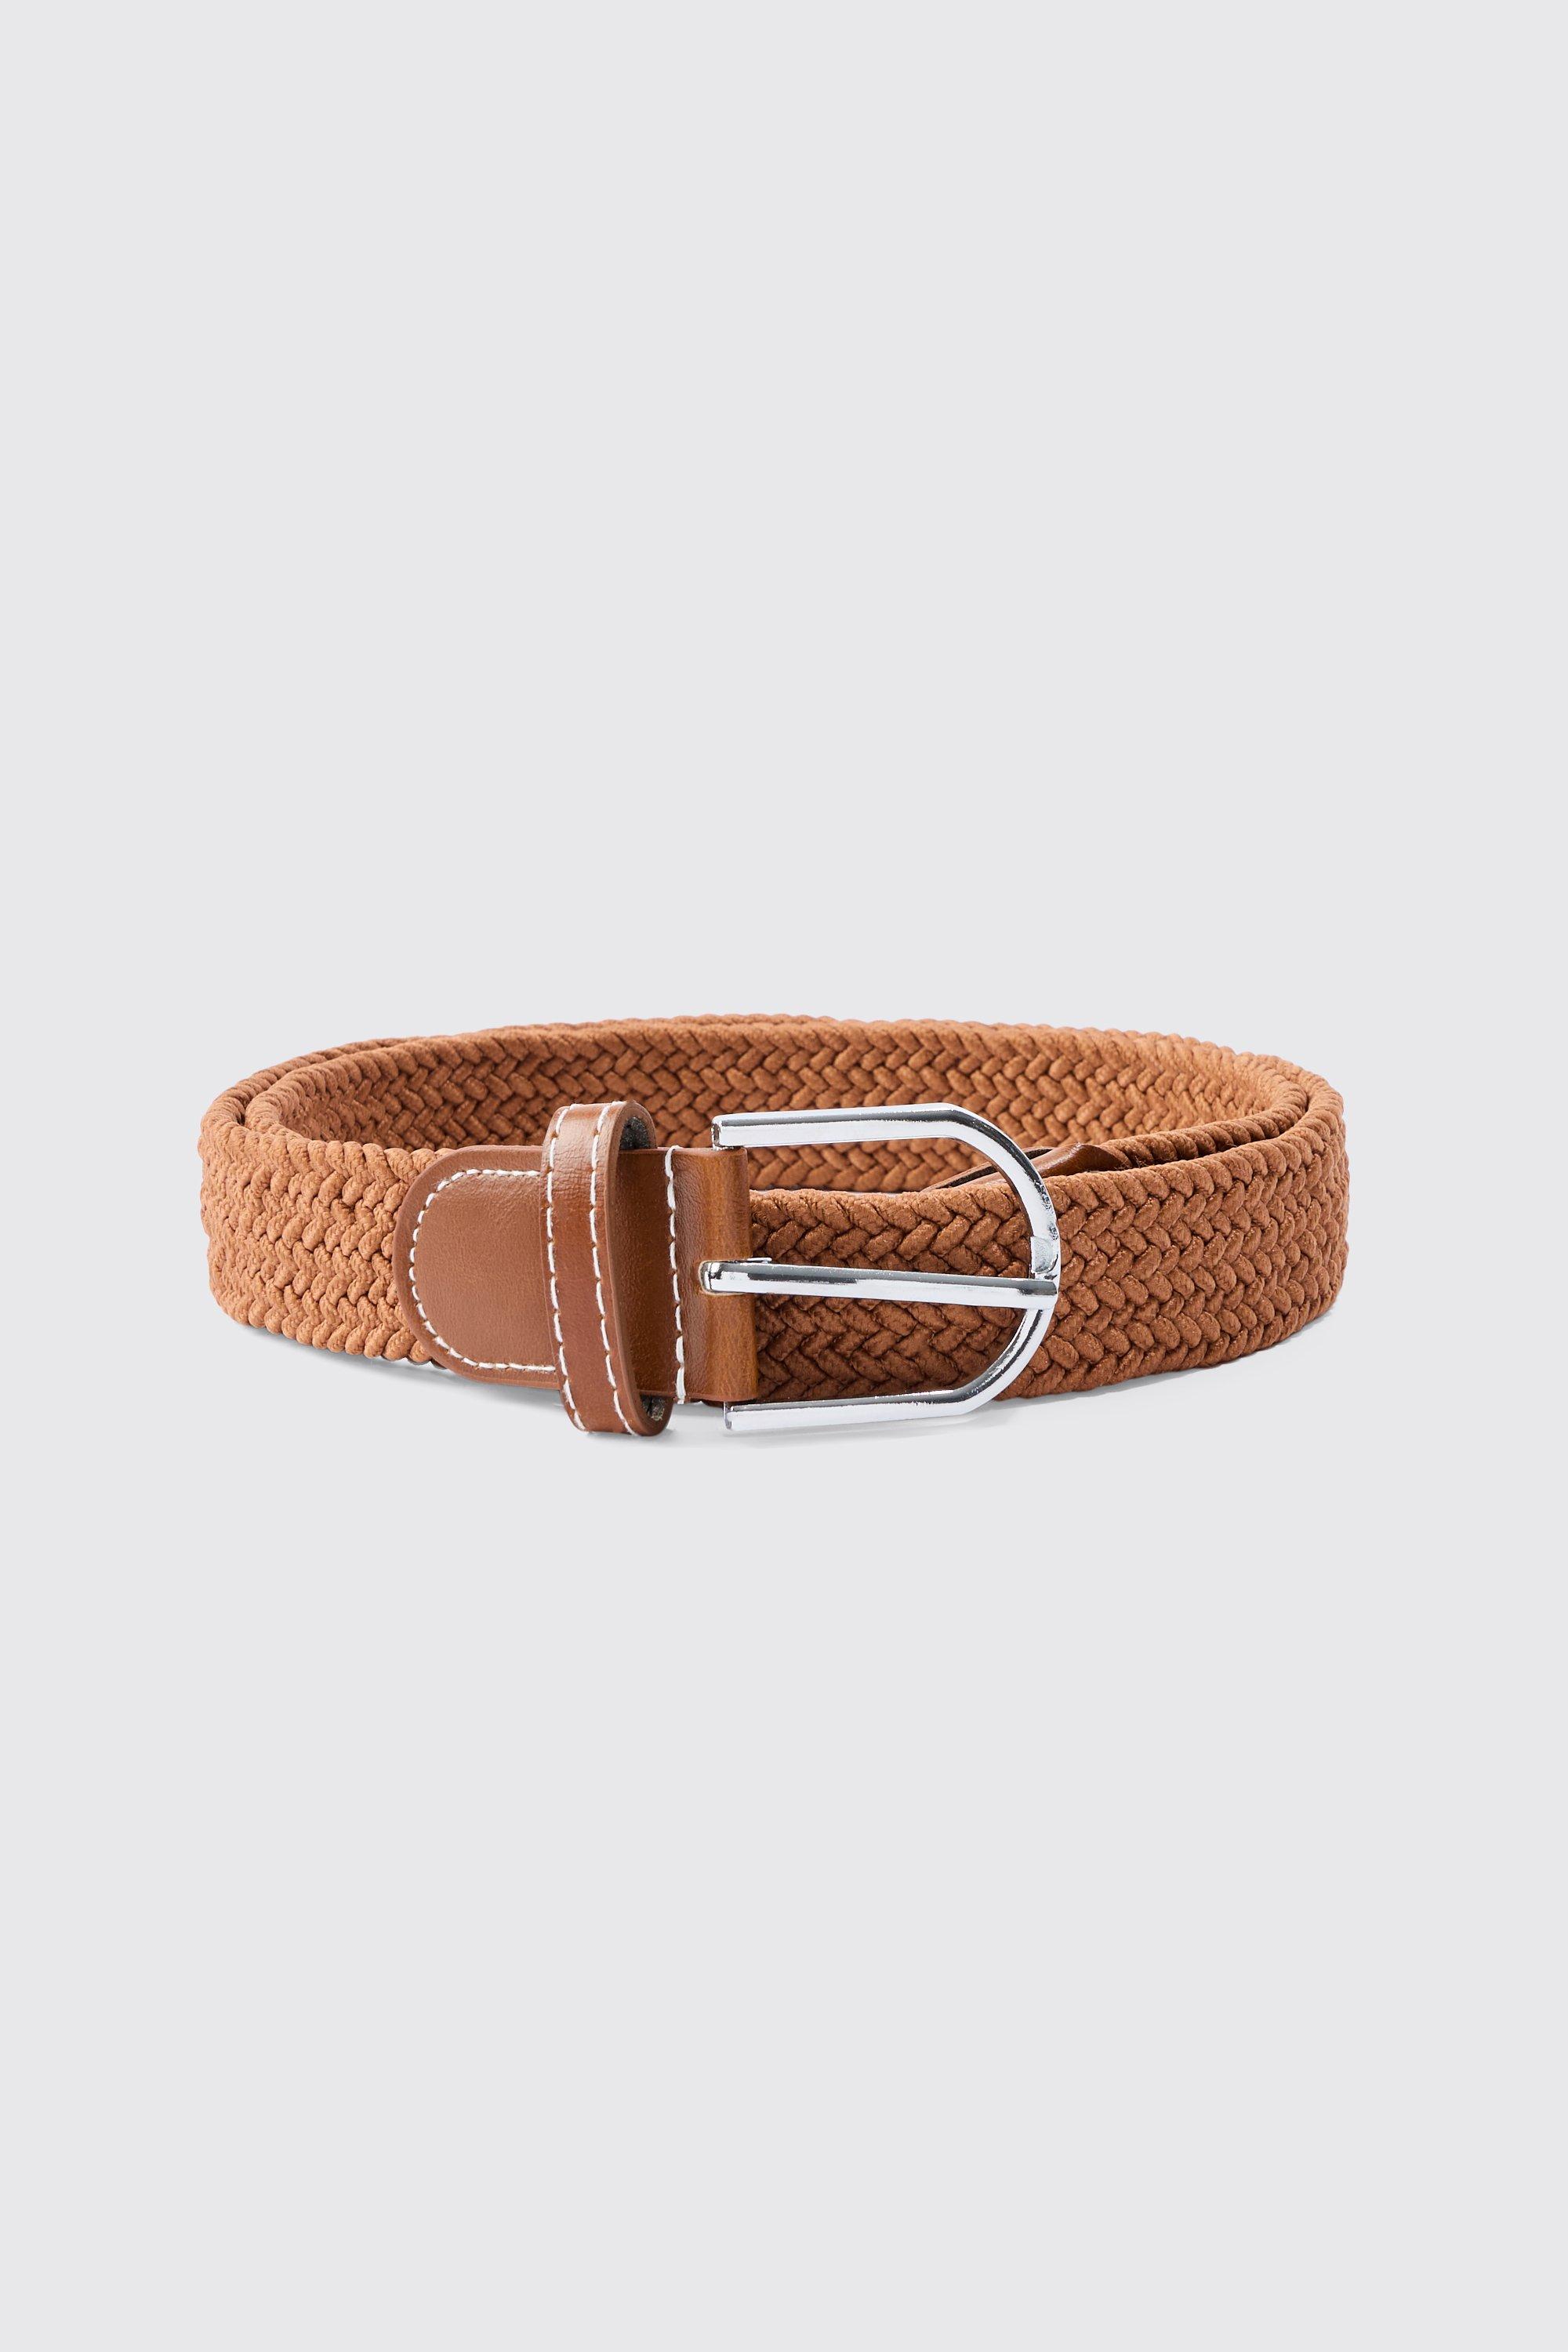 Image of Knitted Belt In Brown, Brown